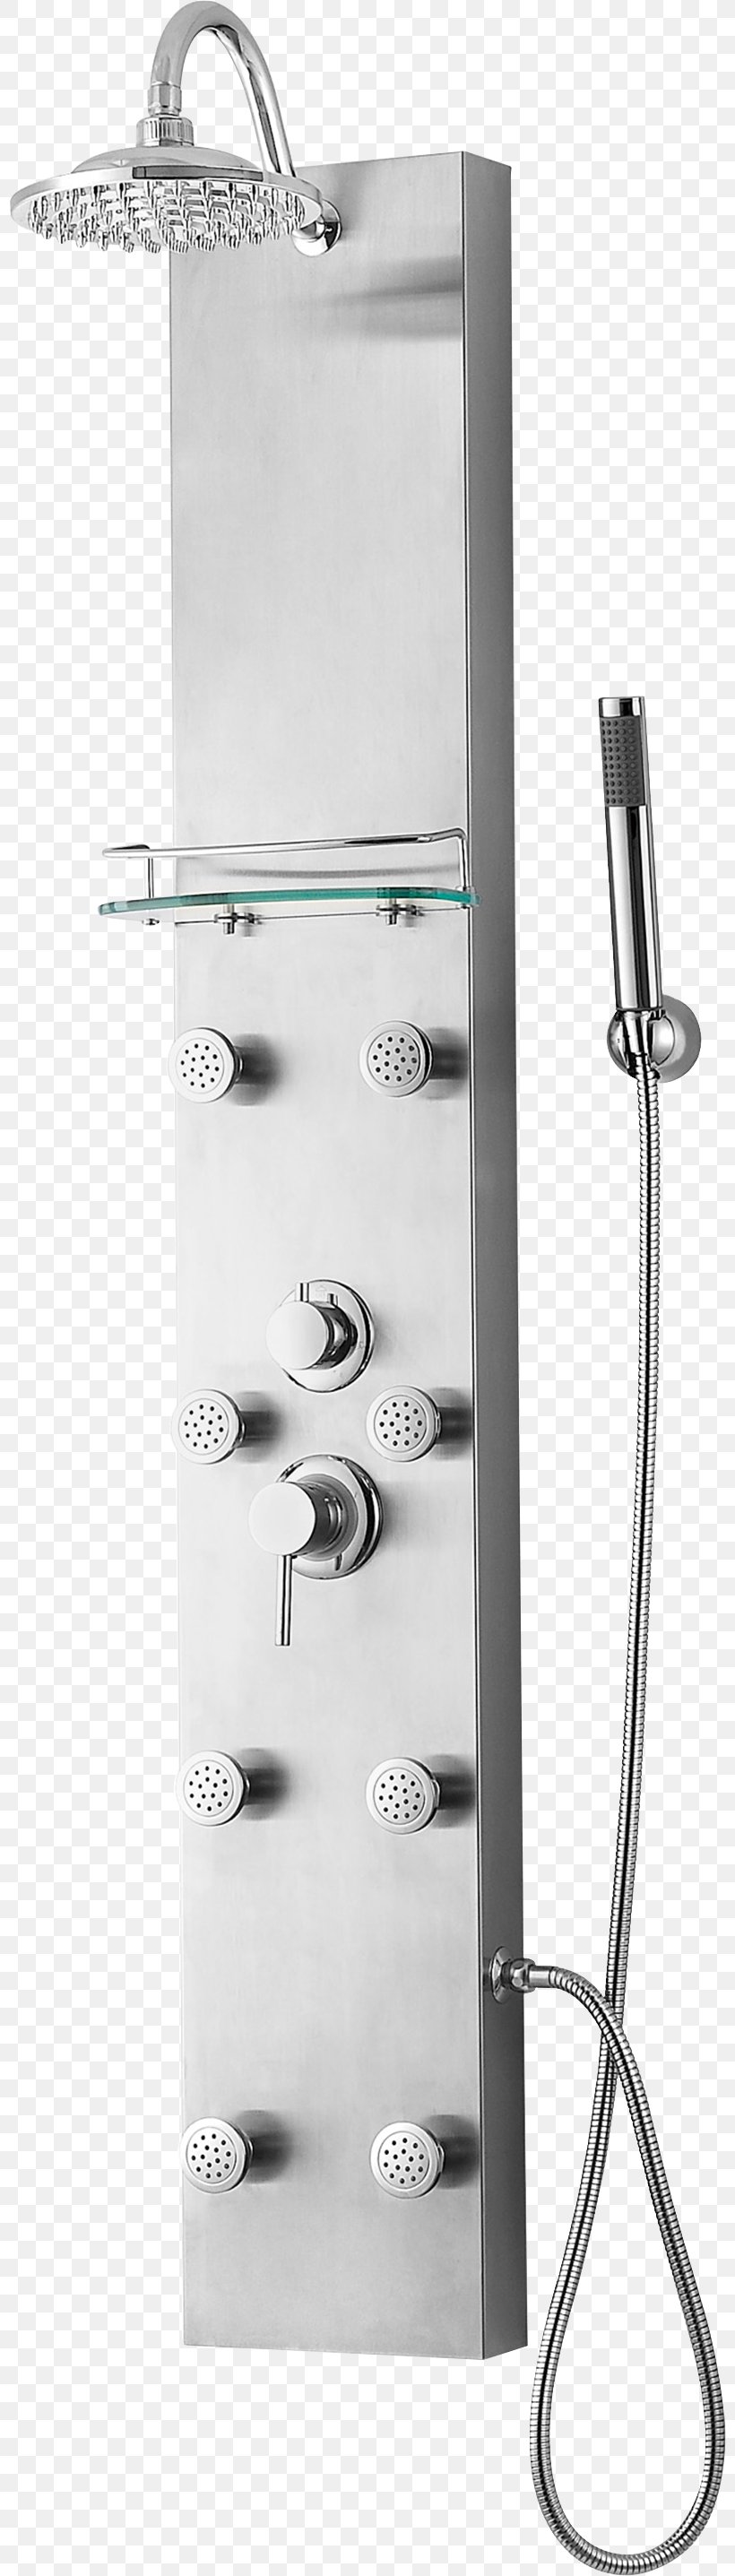 Faucet Handles & Controls Shower Thermostatic Mixing Valve Stainless Steel Spray, PNG, 800x2874px, Faucet Handles Controls, Bathroom, Bathroom Accessory, Brushed Metal, Exhaust Hood Download Free